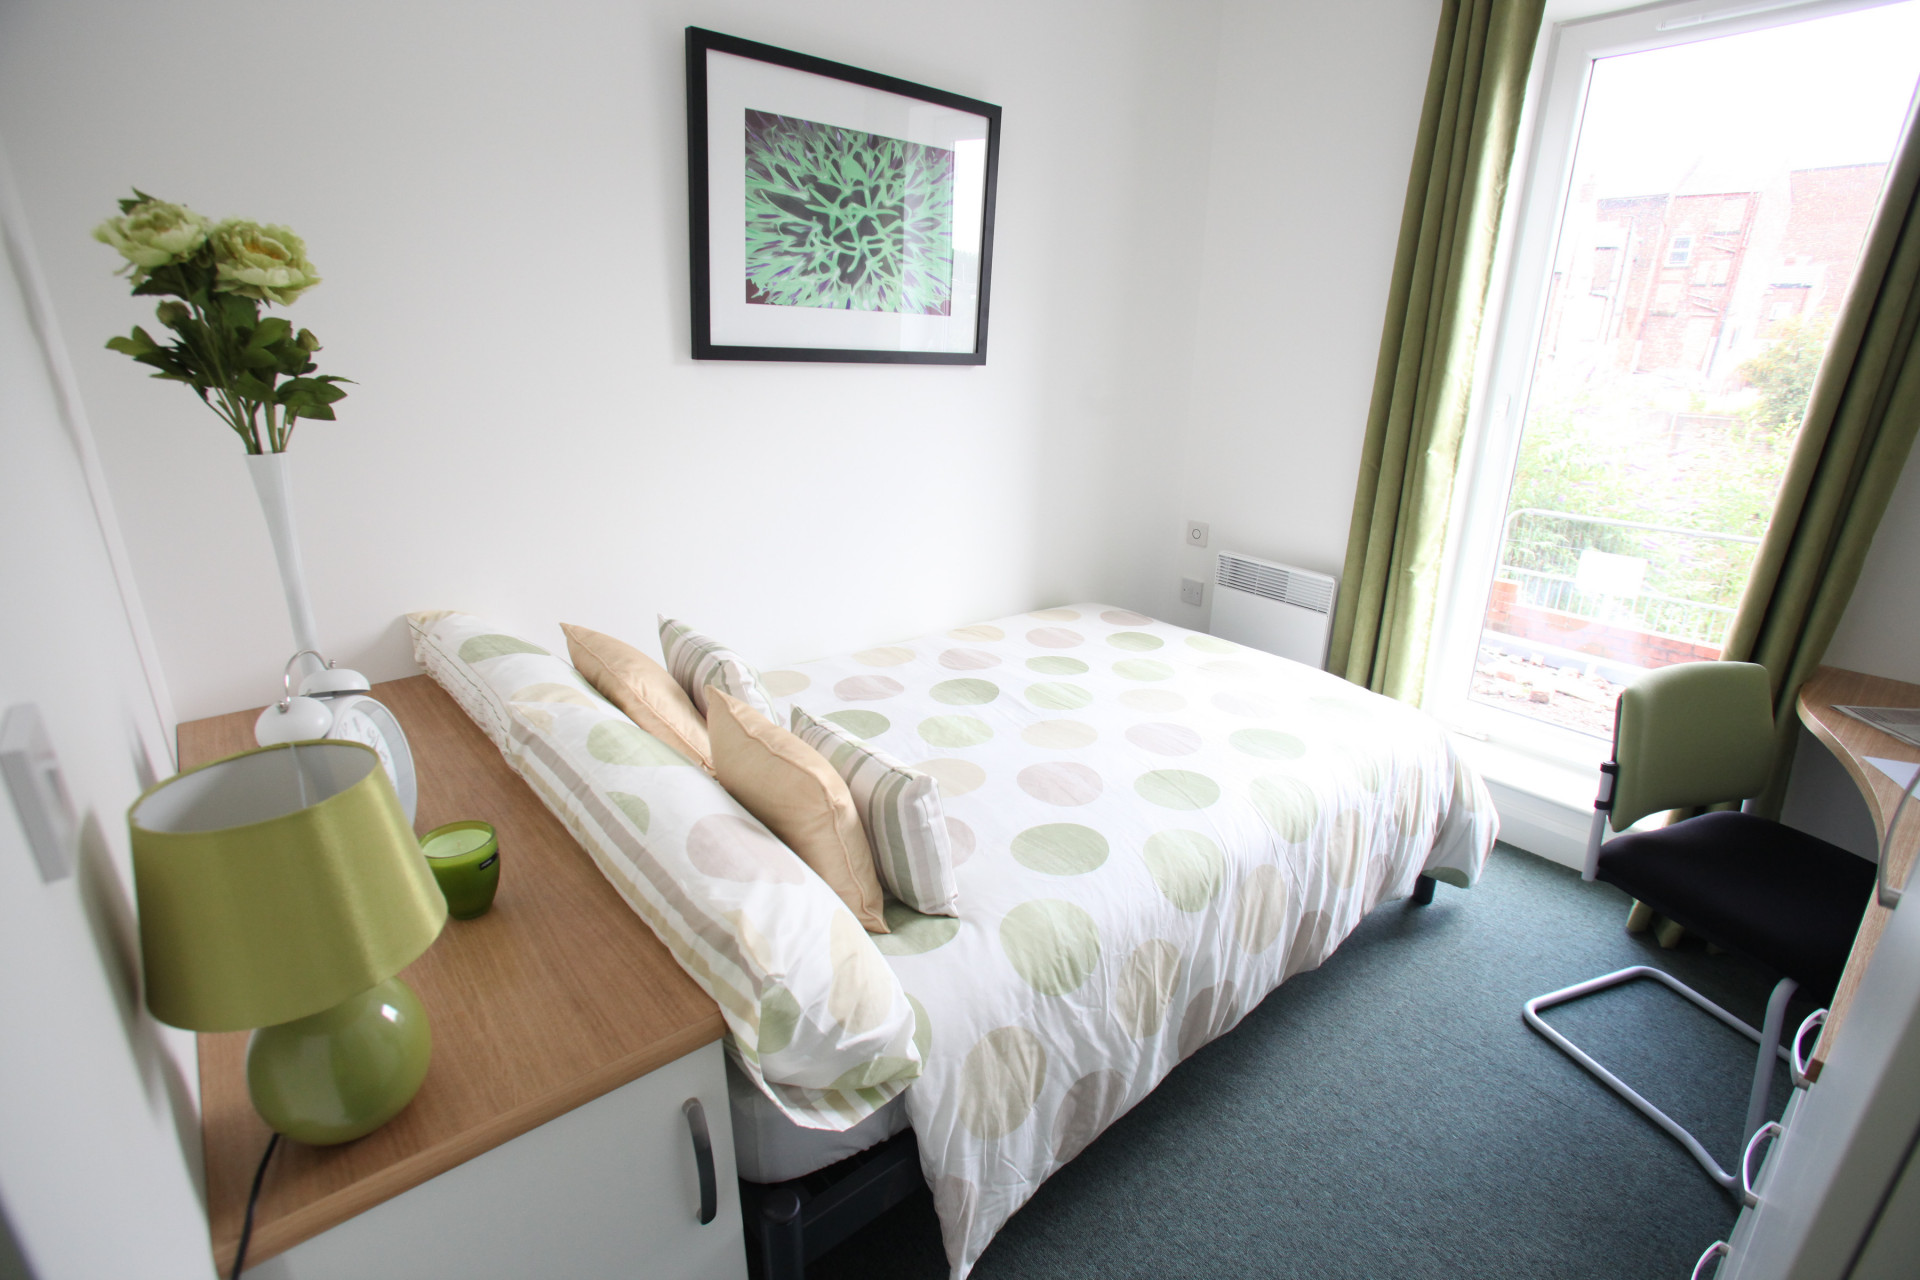 Share a flat. 1 Room Flat to rent. Apartments (from private landlords) for students. Flat sharing.